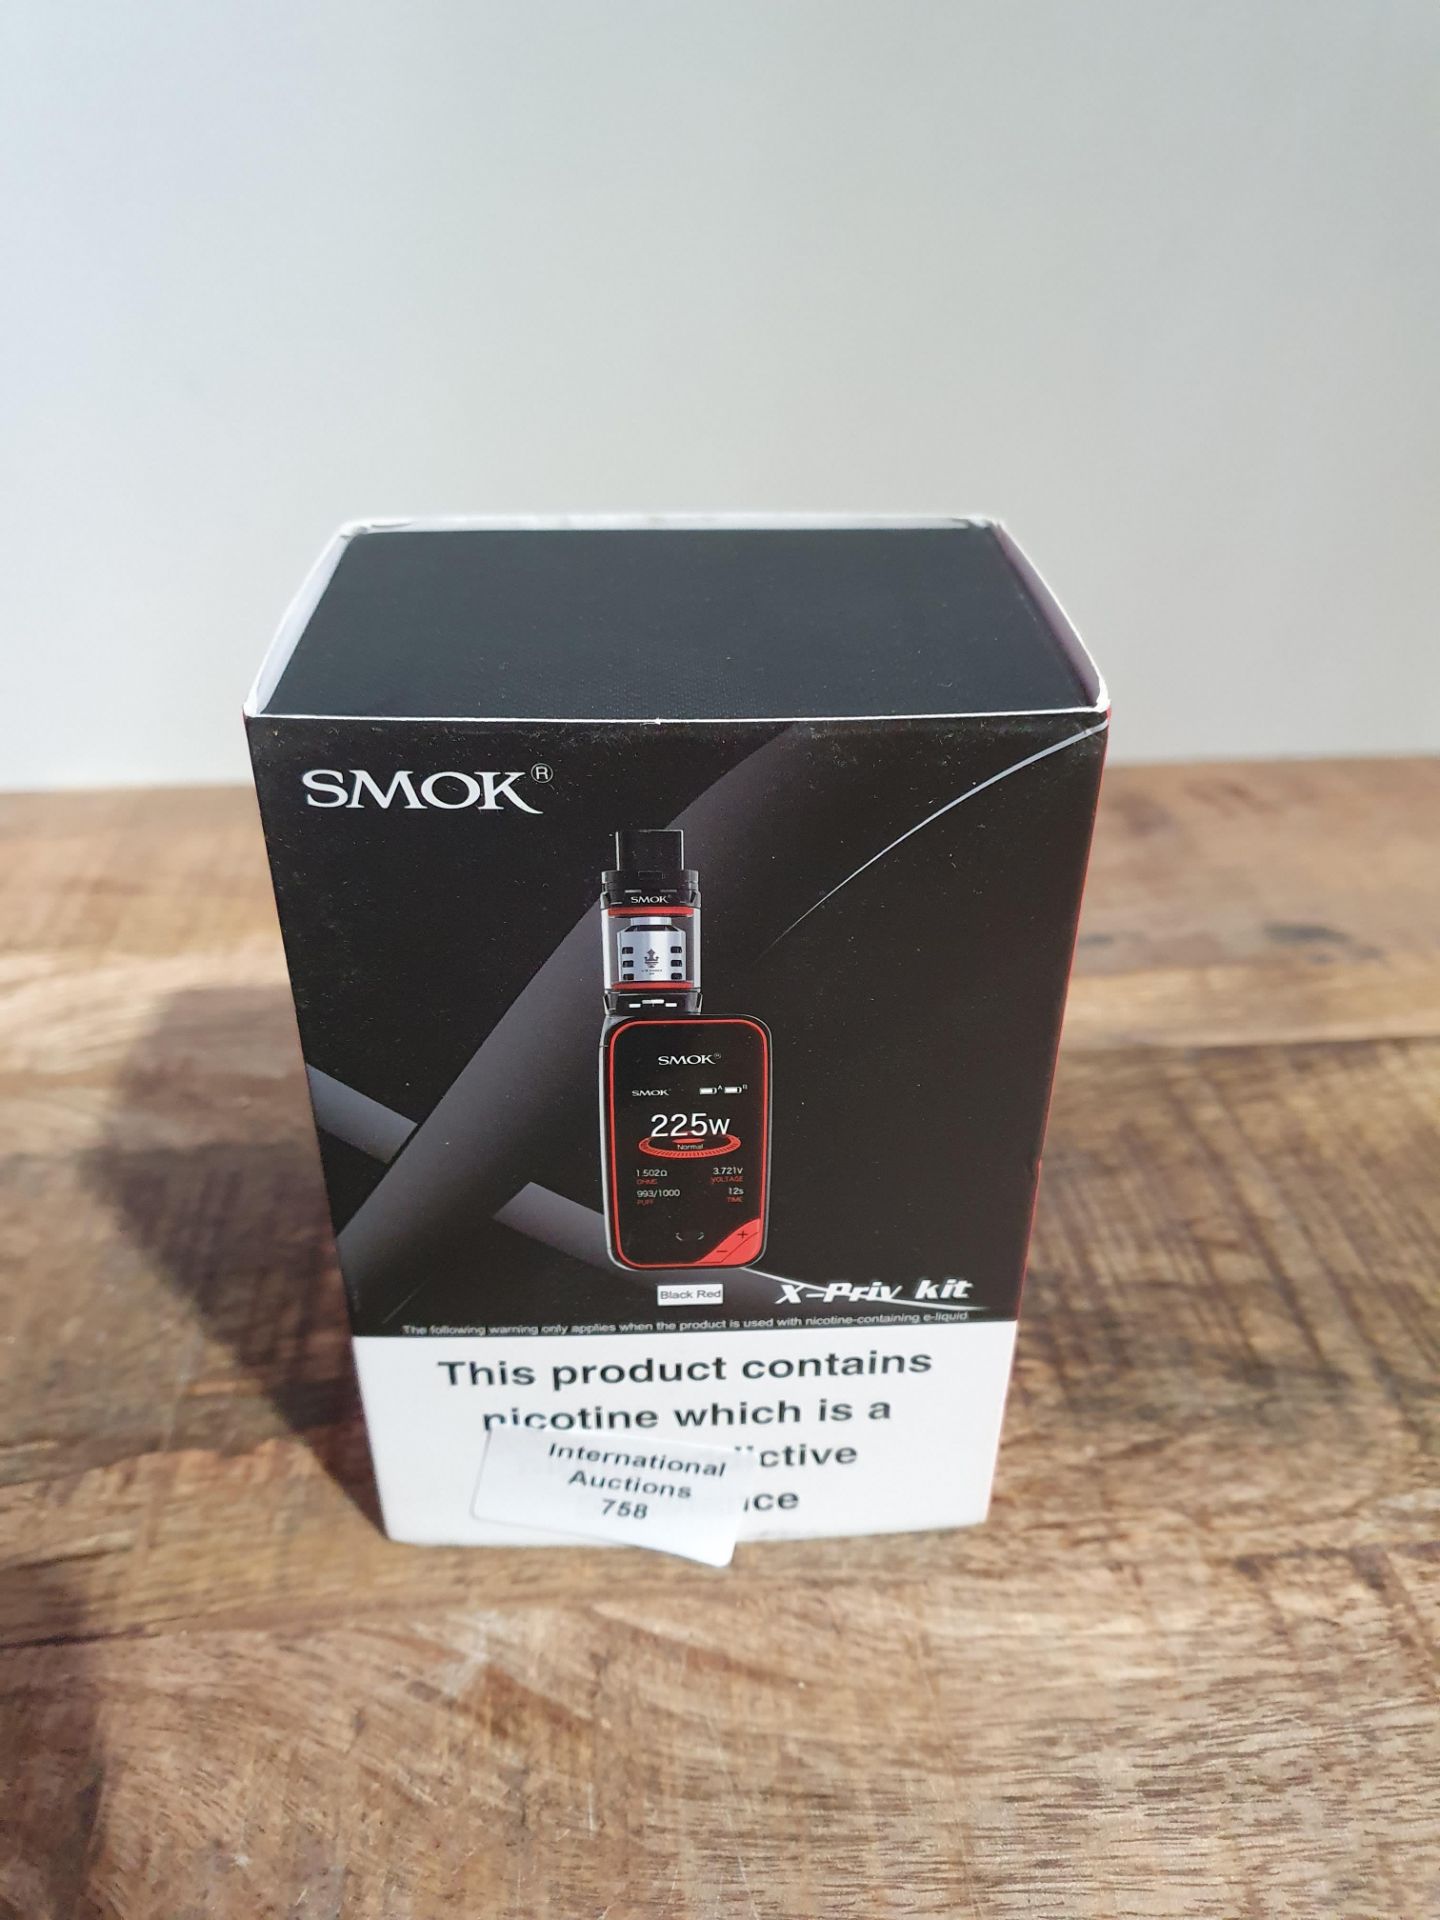 SMOK X-PRIY KIT Condition ReportAppraisal Available on Request - All Items are Unchecked/Untested